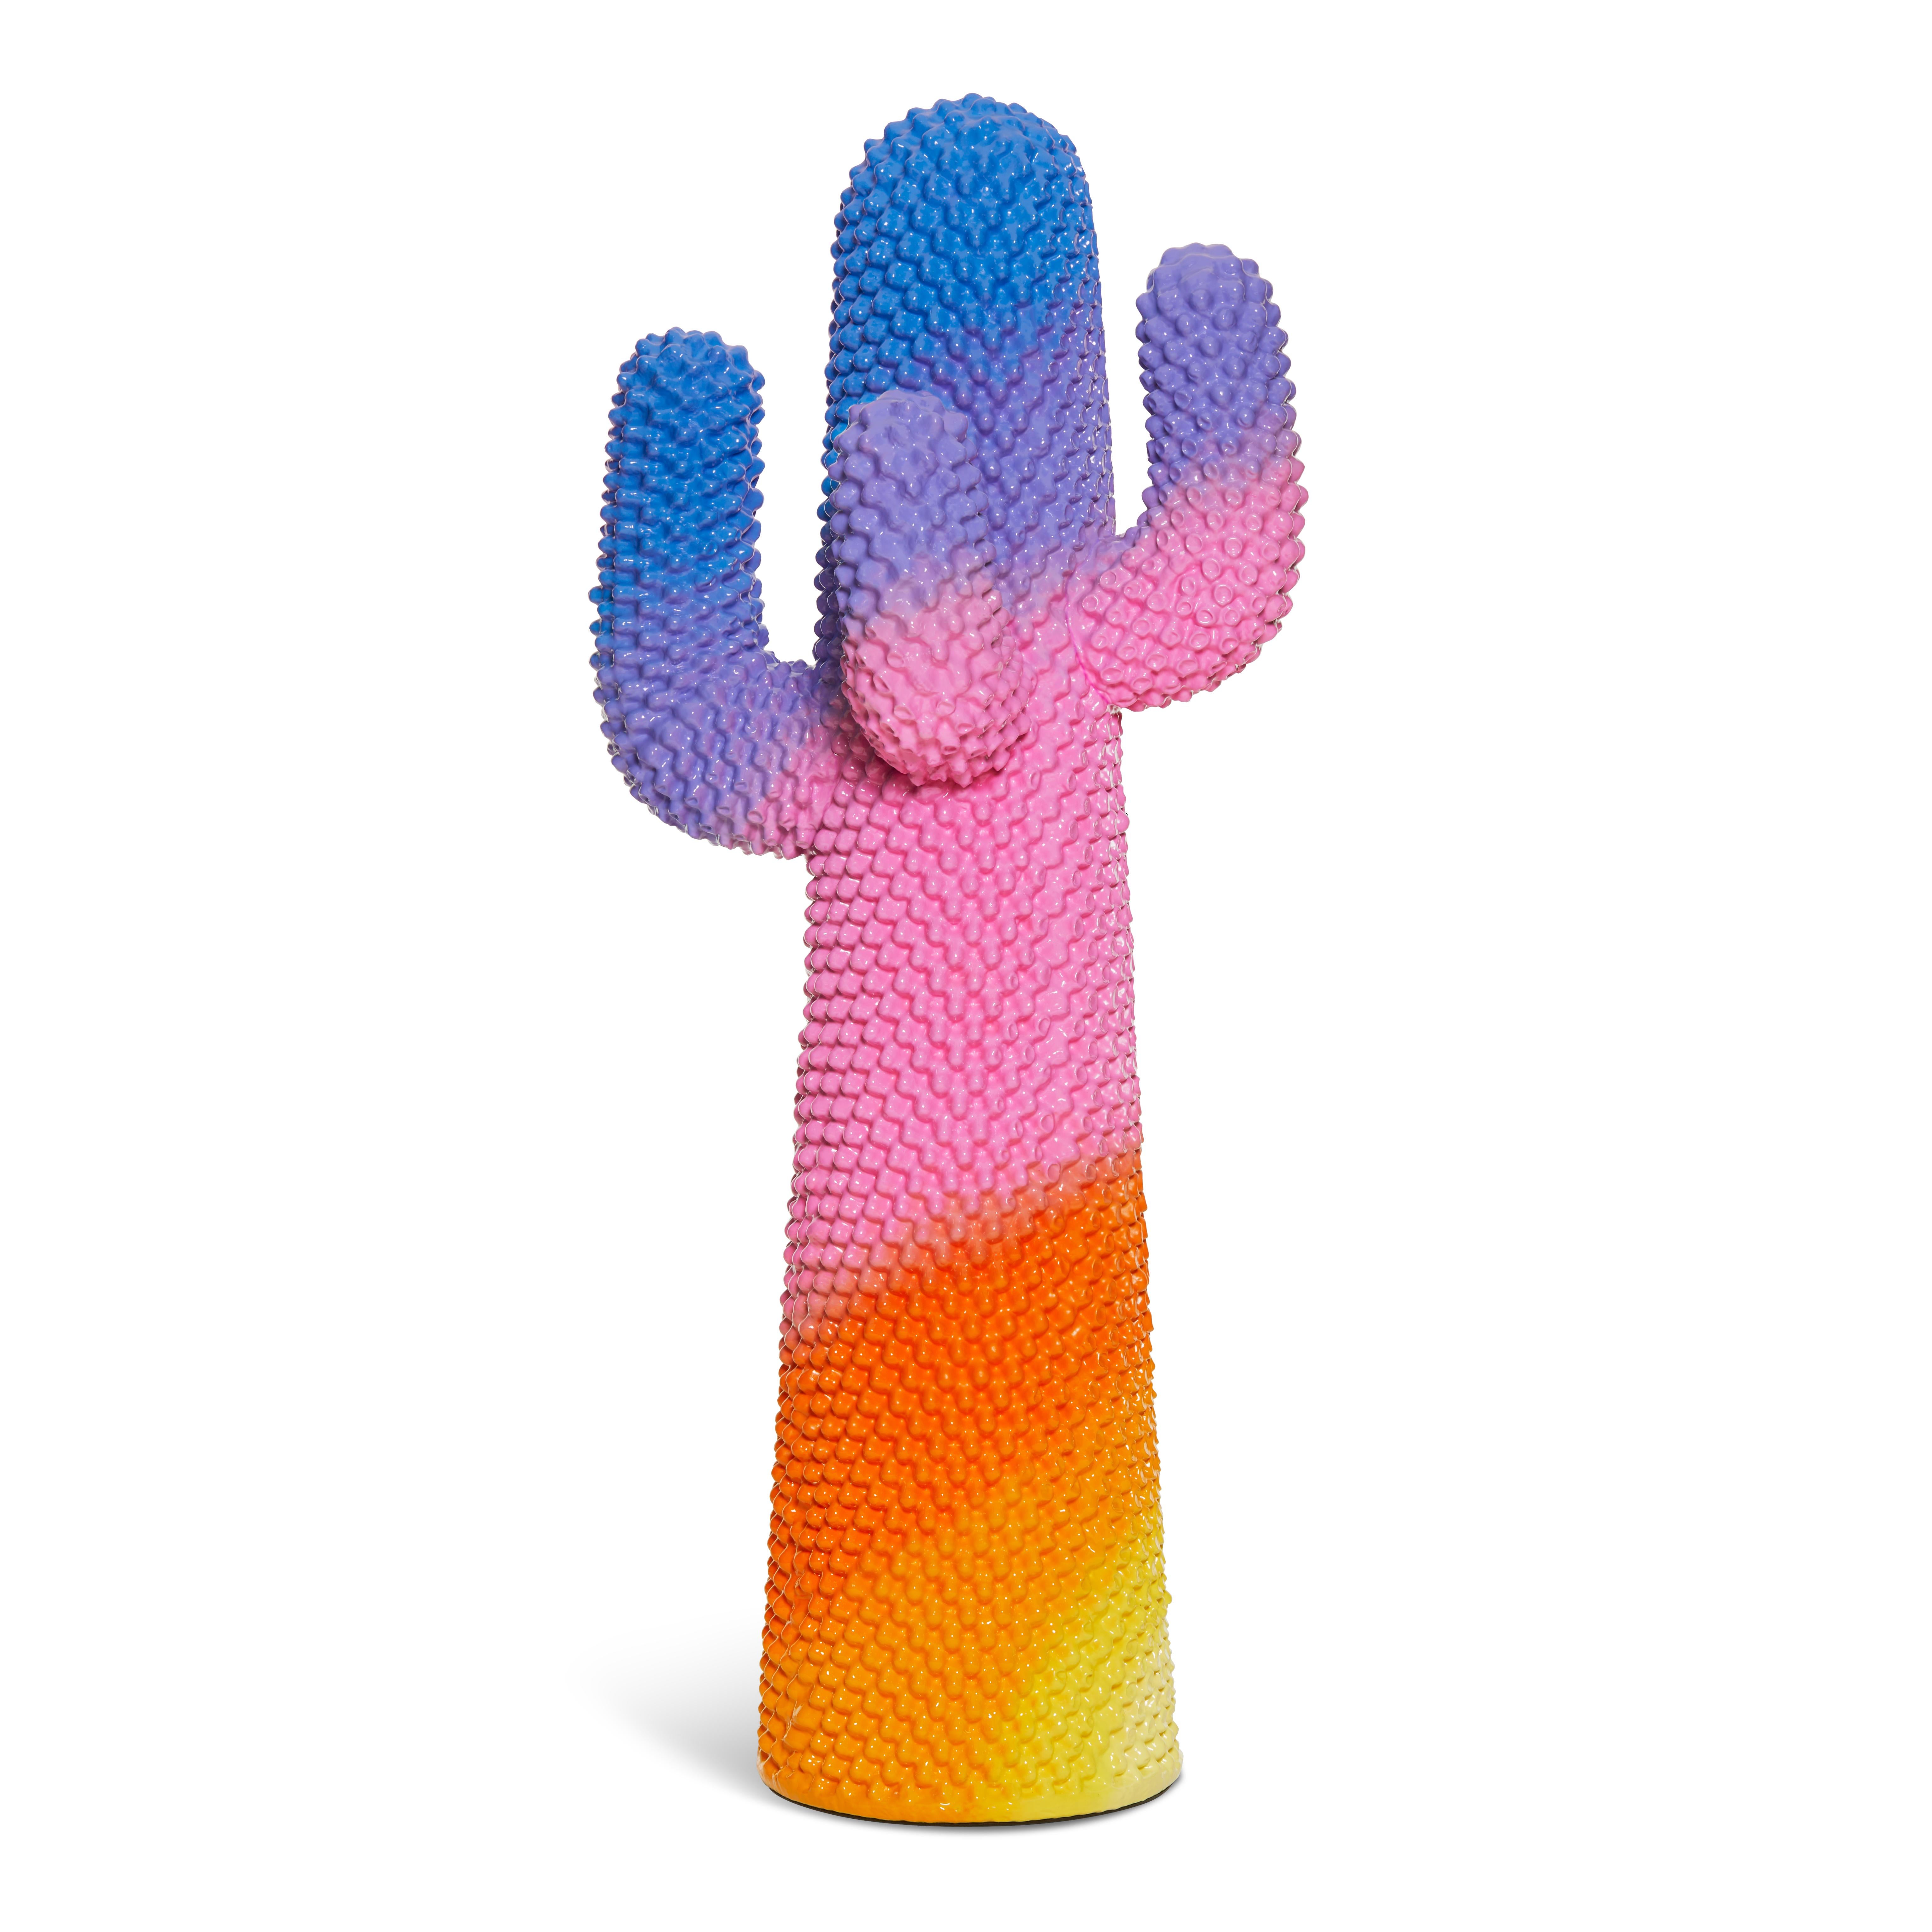 Gufram and Paul Smith renew their collaboration to present the SUNRISE CACTUS®, a bold new interpretation of the iconic piece originally designed by Guido Drocco and Franco Mello in 1972. 
The SUNRISE CACTUS®, is made from the original mould as the